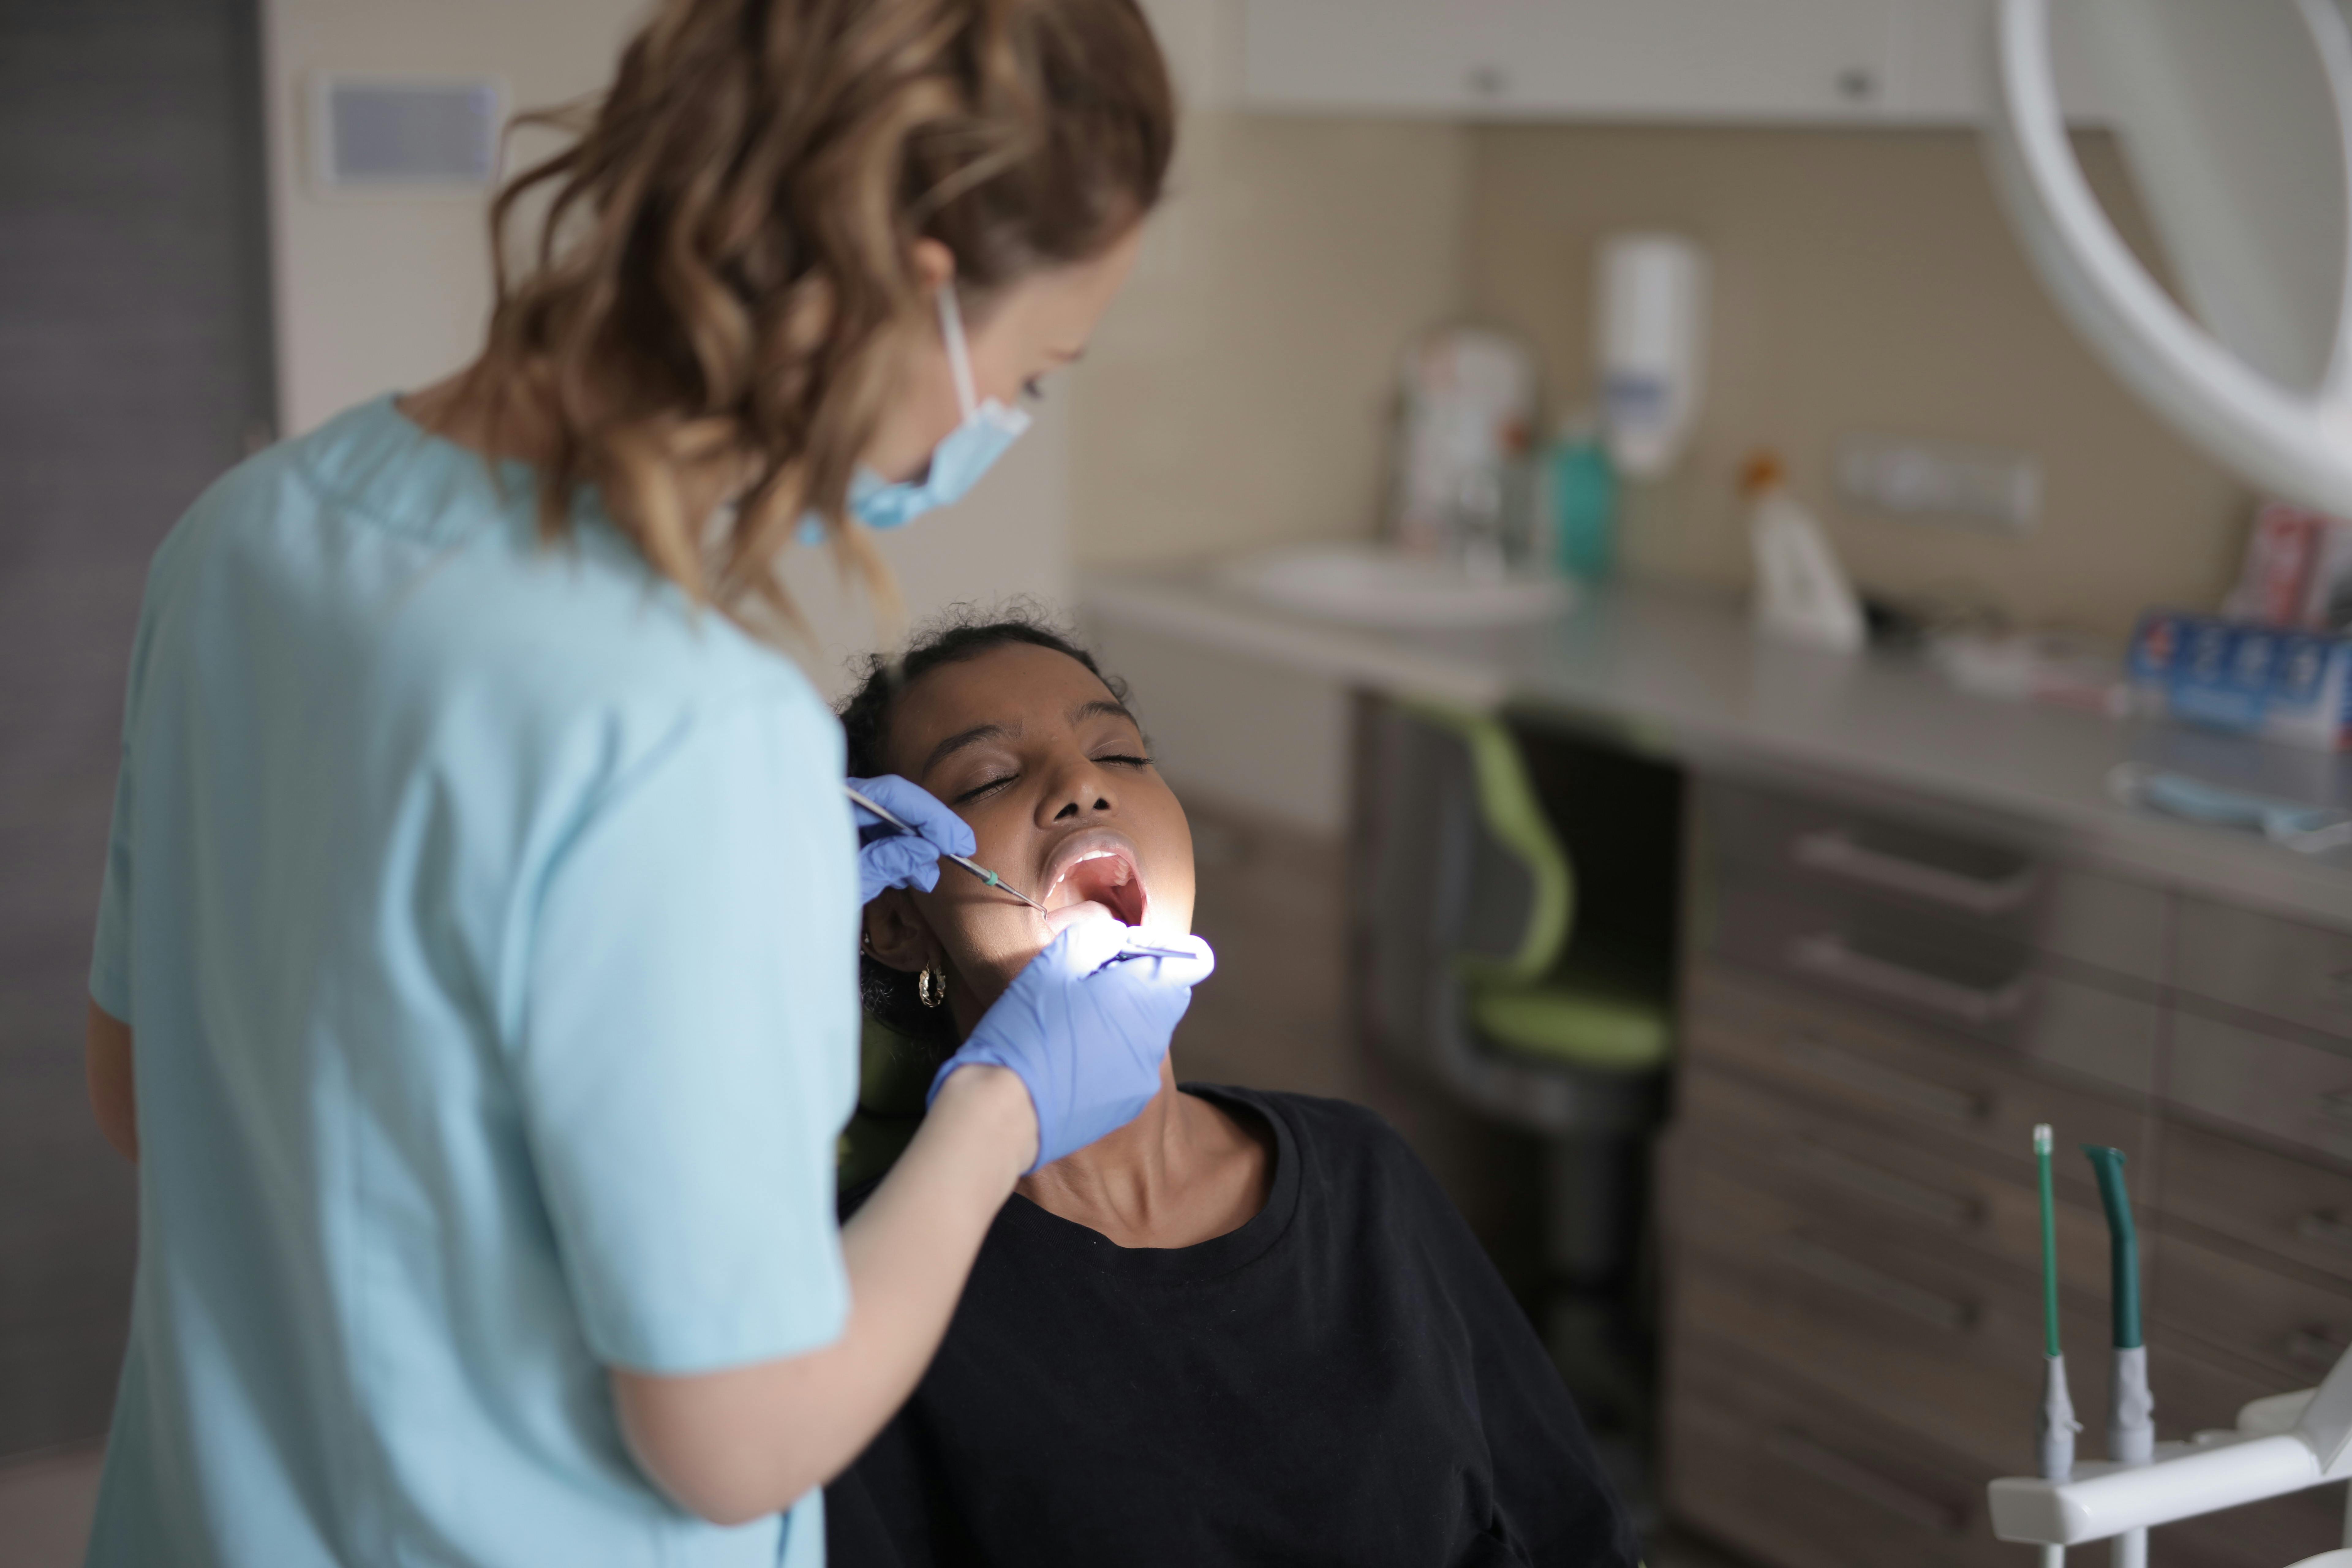 A Female Dentist Treating Her Patient \u00b7 Free Stock Photo